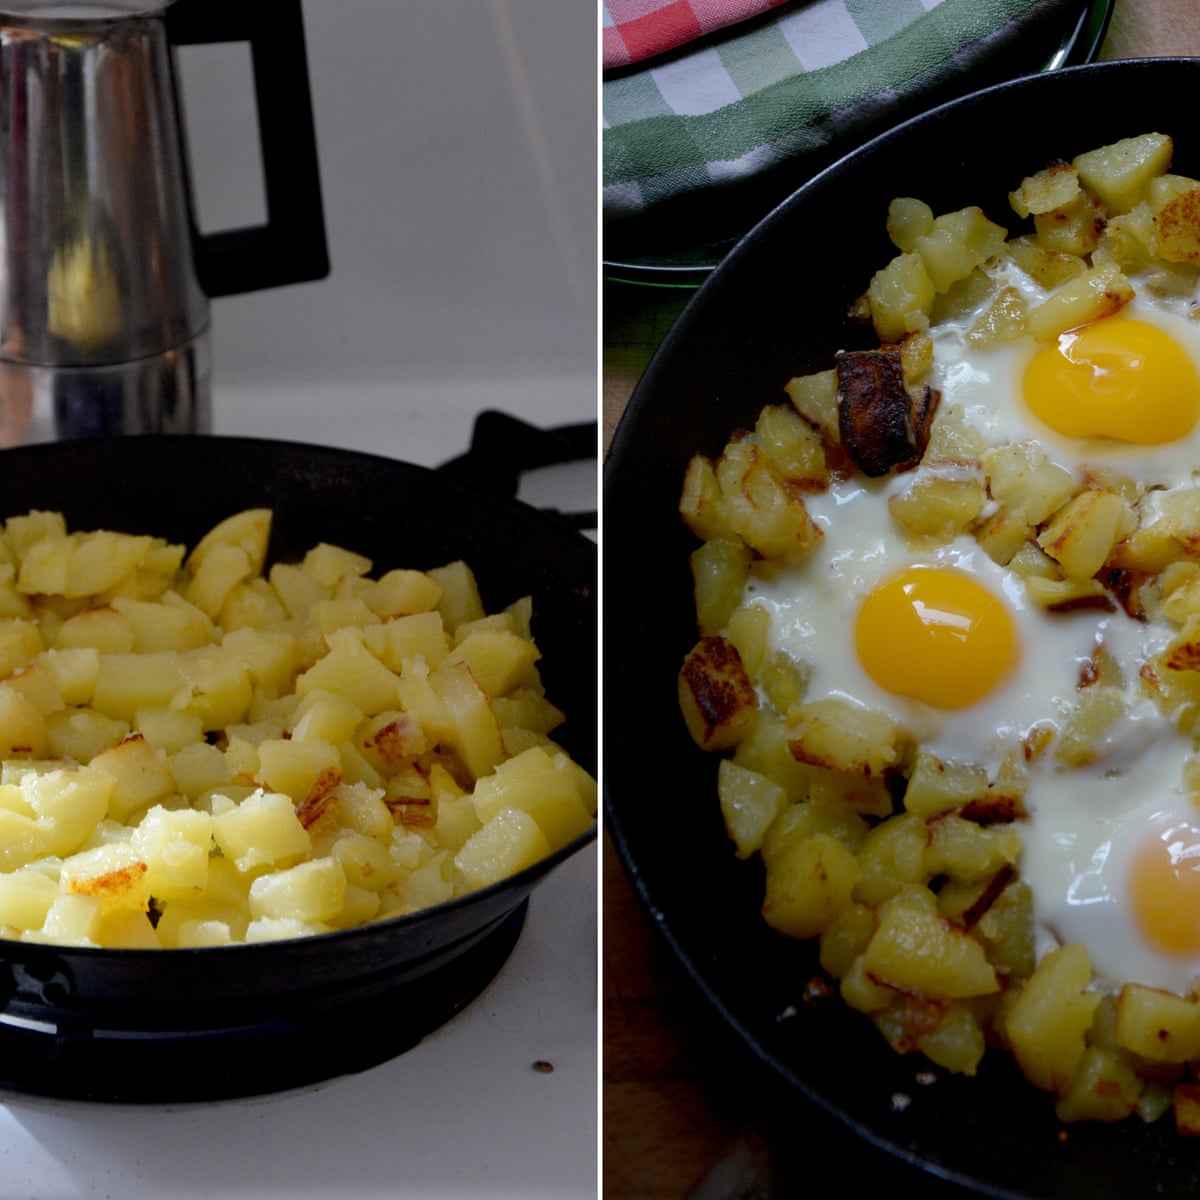 Rachel Roddy S Comfort Food Recipe Fried Potatoes And Eggs A Kitchen In Rome Food The Guardian,2nd Anniversary Gift For Wife